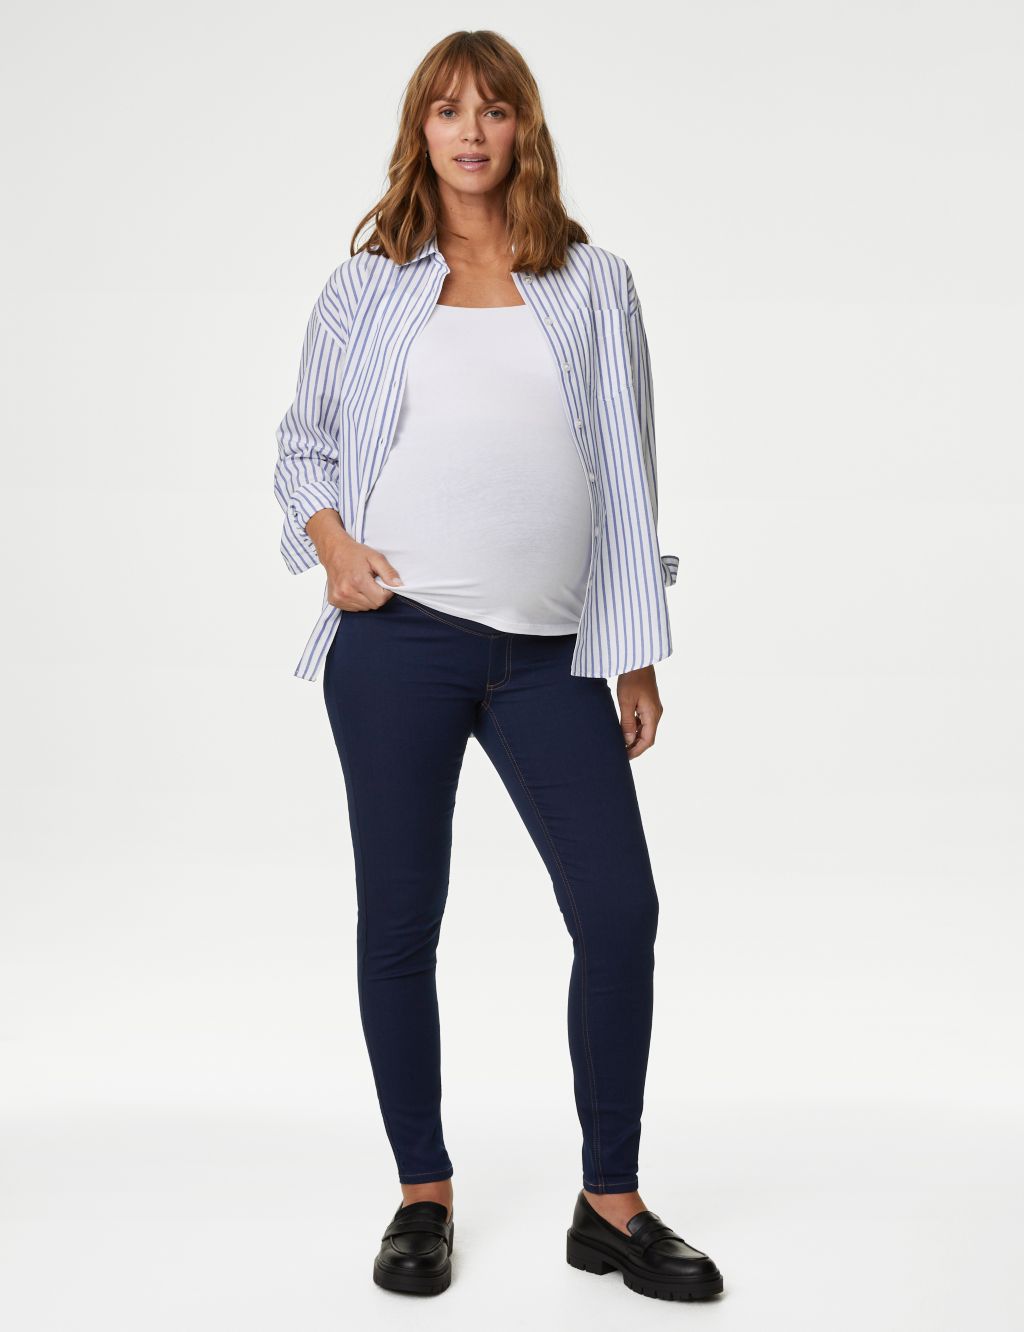 Maternity Over Bump Jeggings image 1